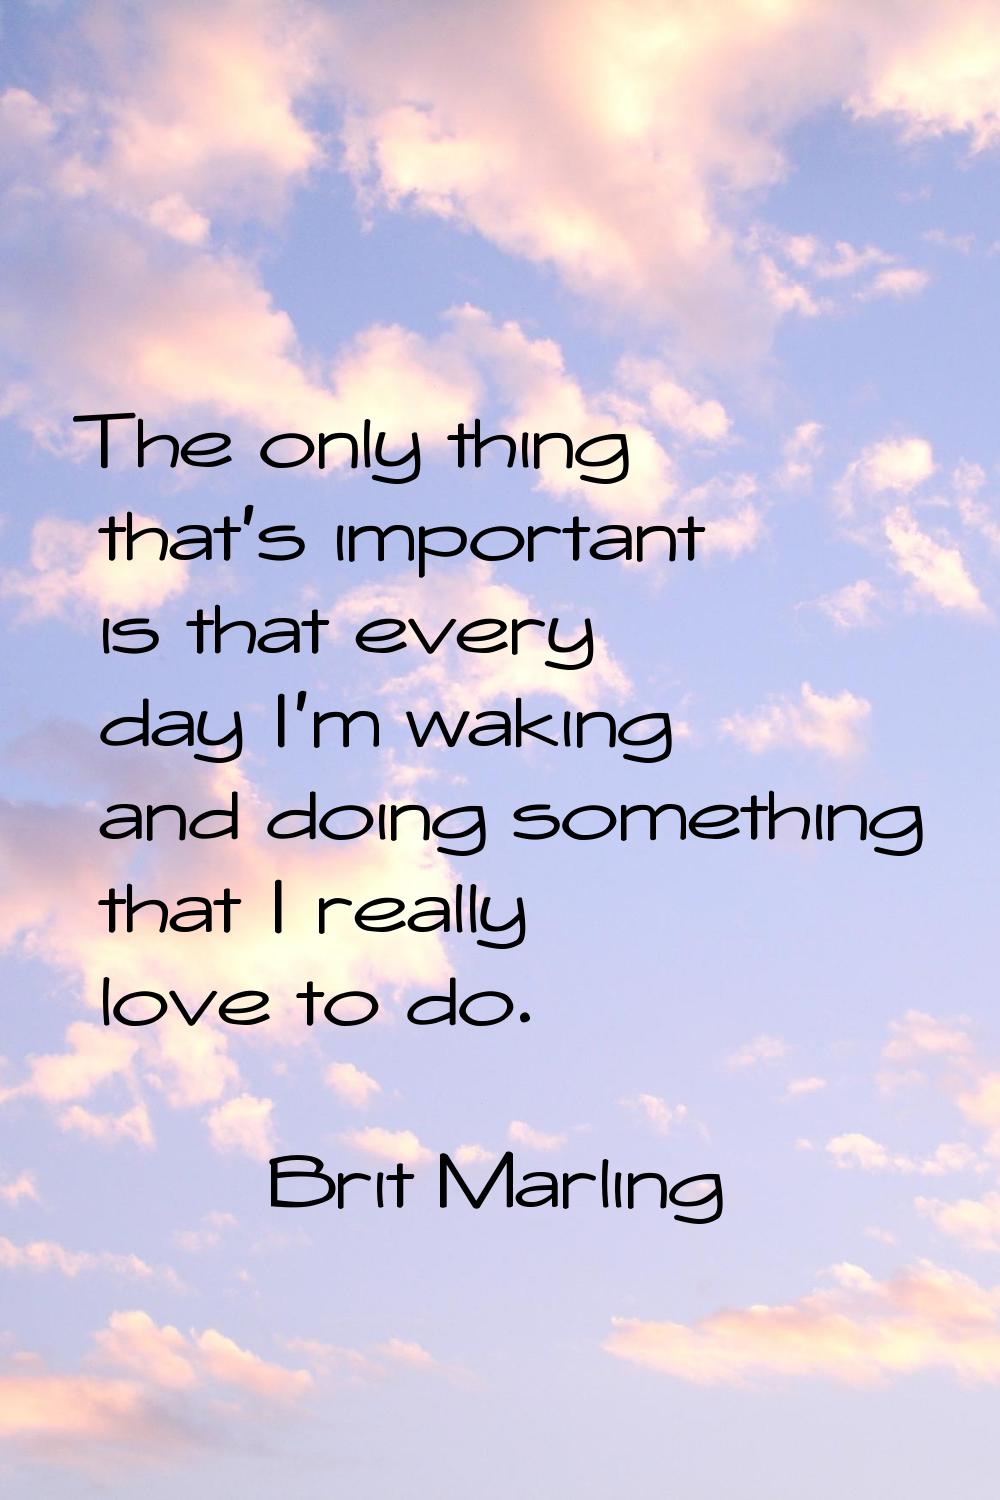 The only thing that's important is that every day I'm waking and doing something that I really love